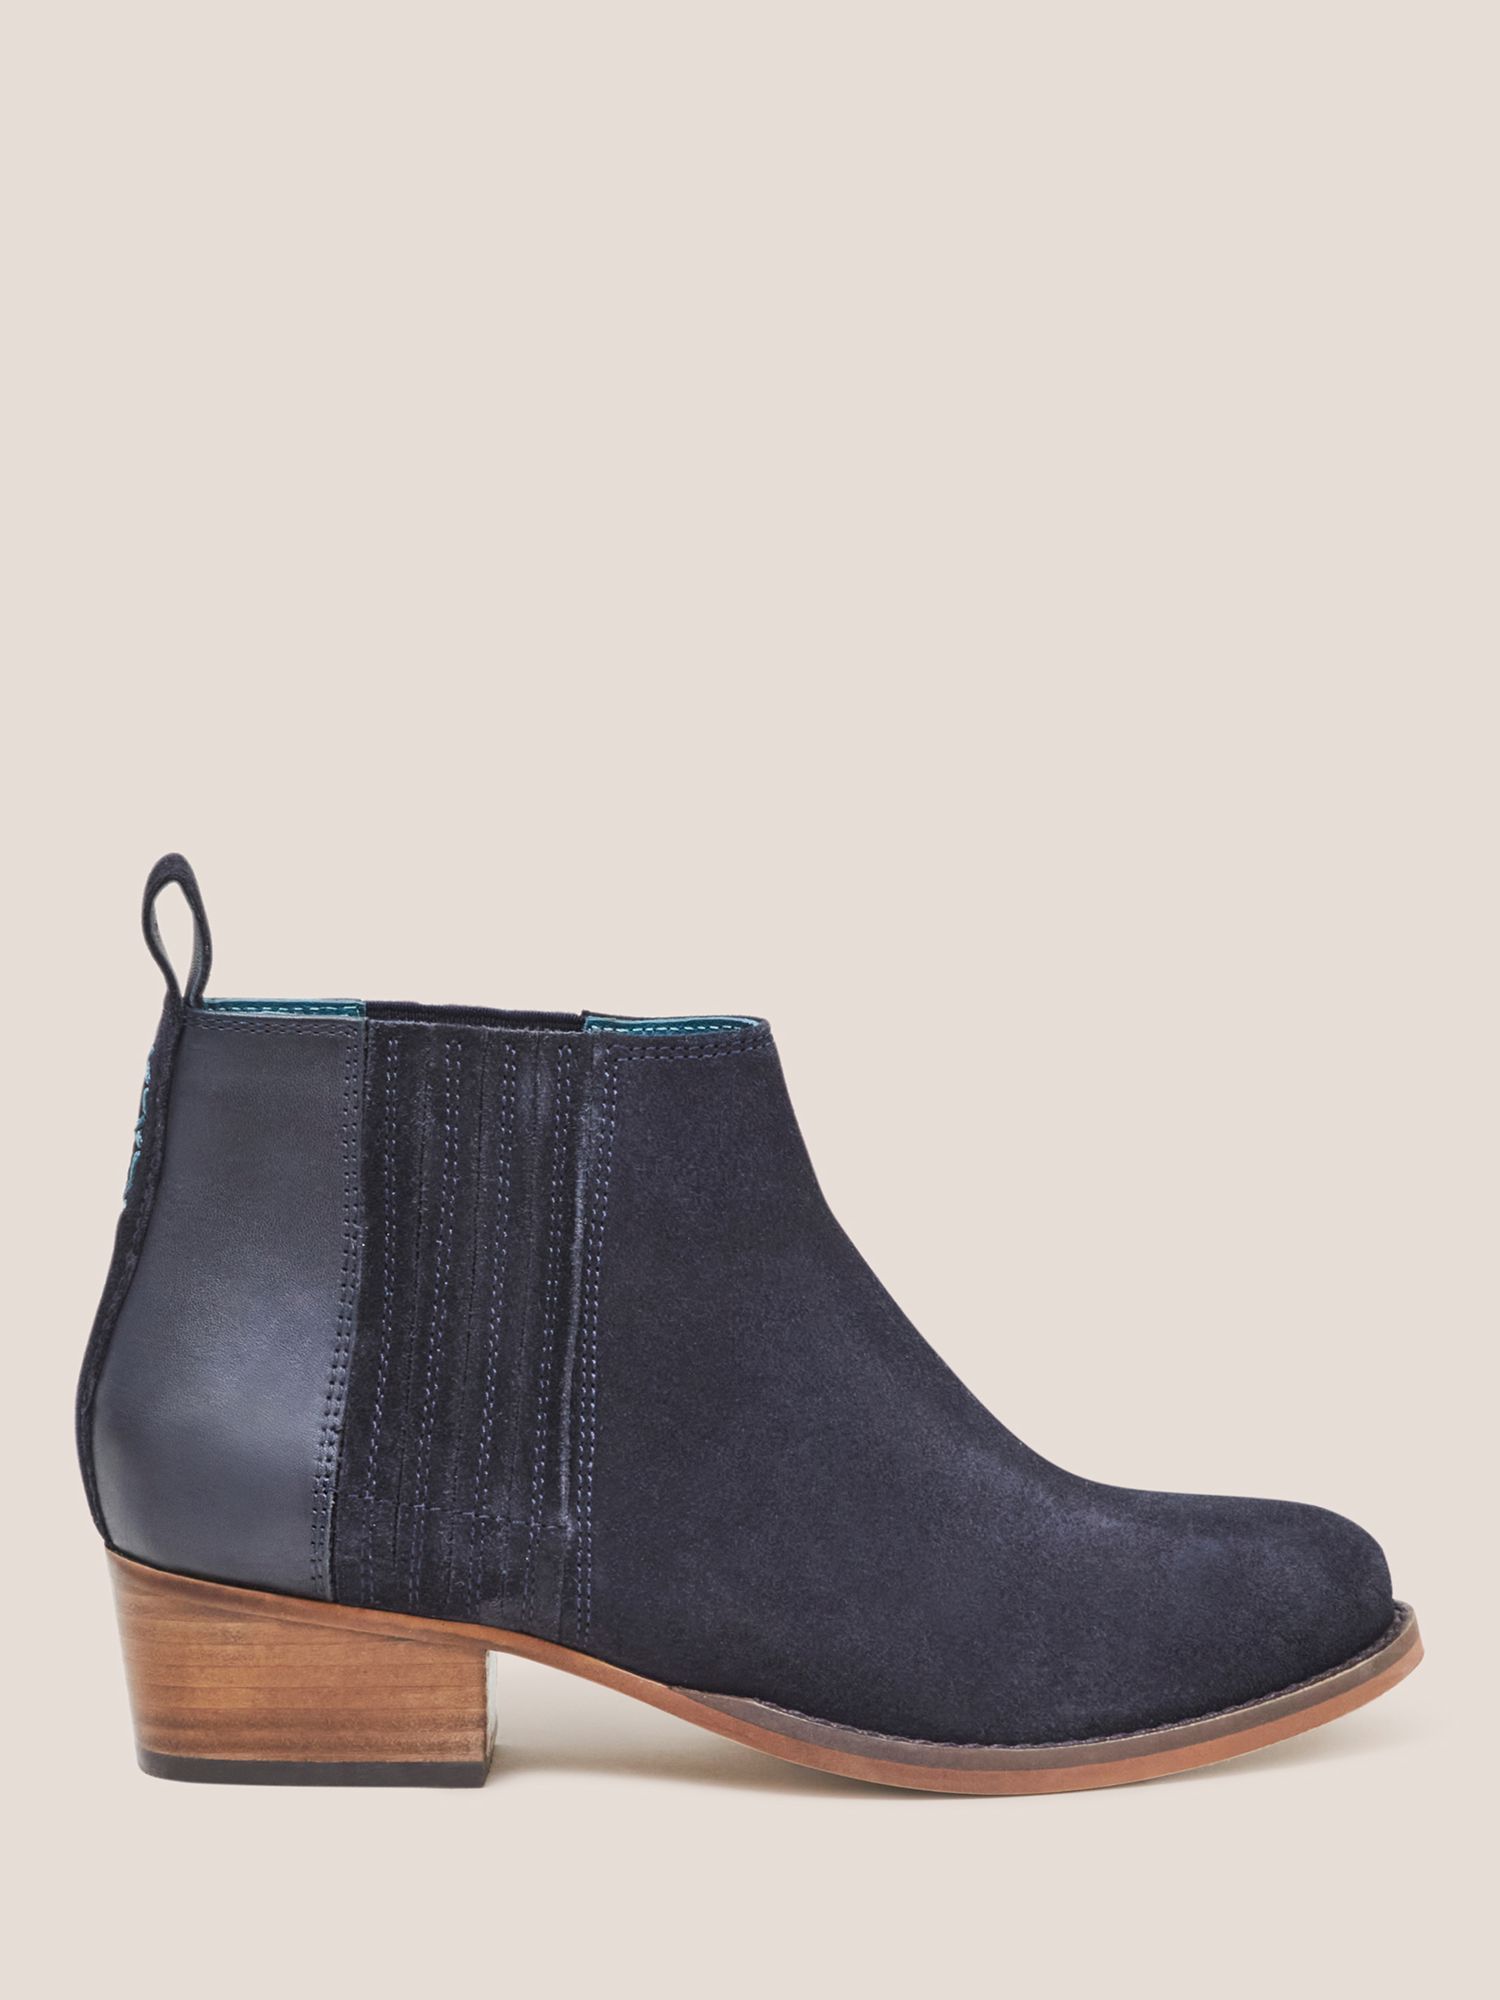 White Stuff Winona Suede Ankle Boots, Navy at John Lewis & Partners